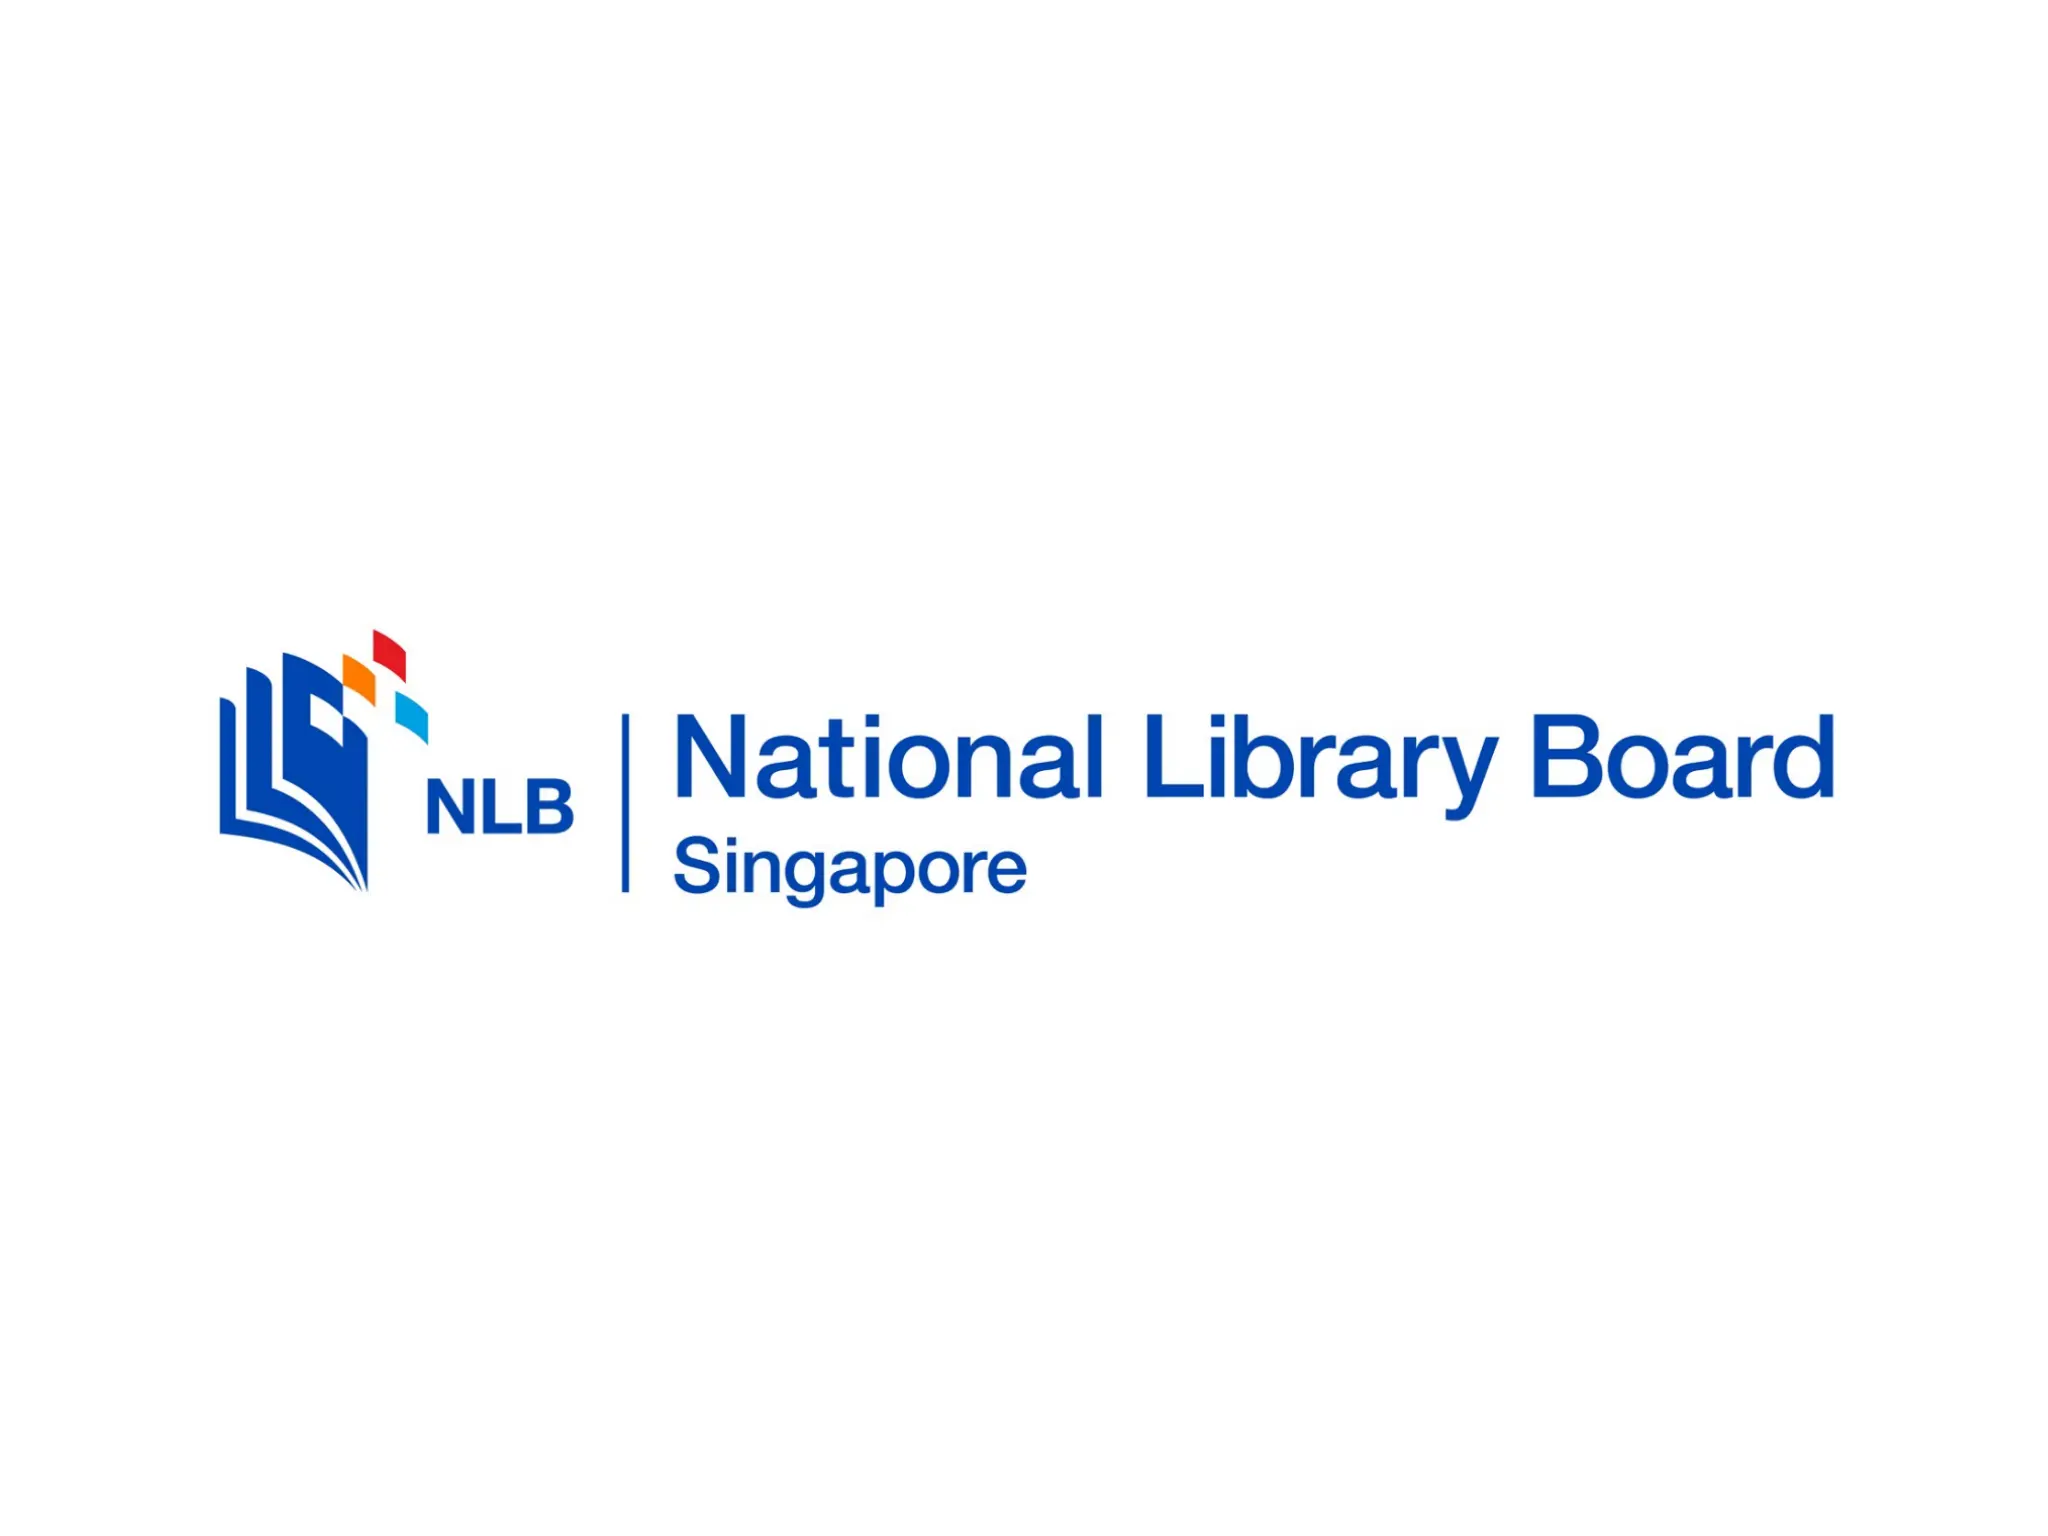 NATIONAL LIBRARY BOARD